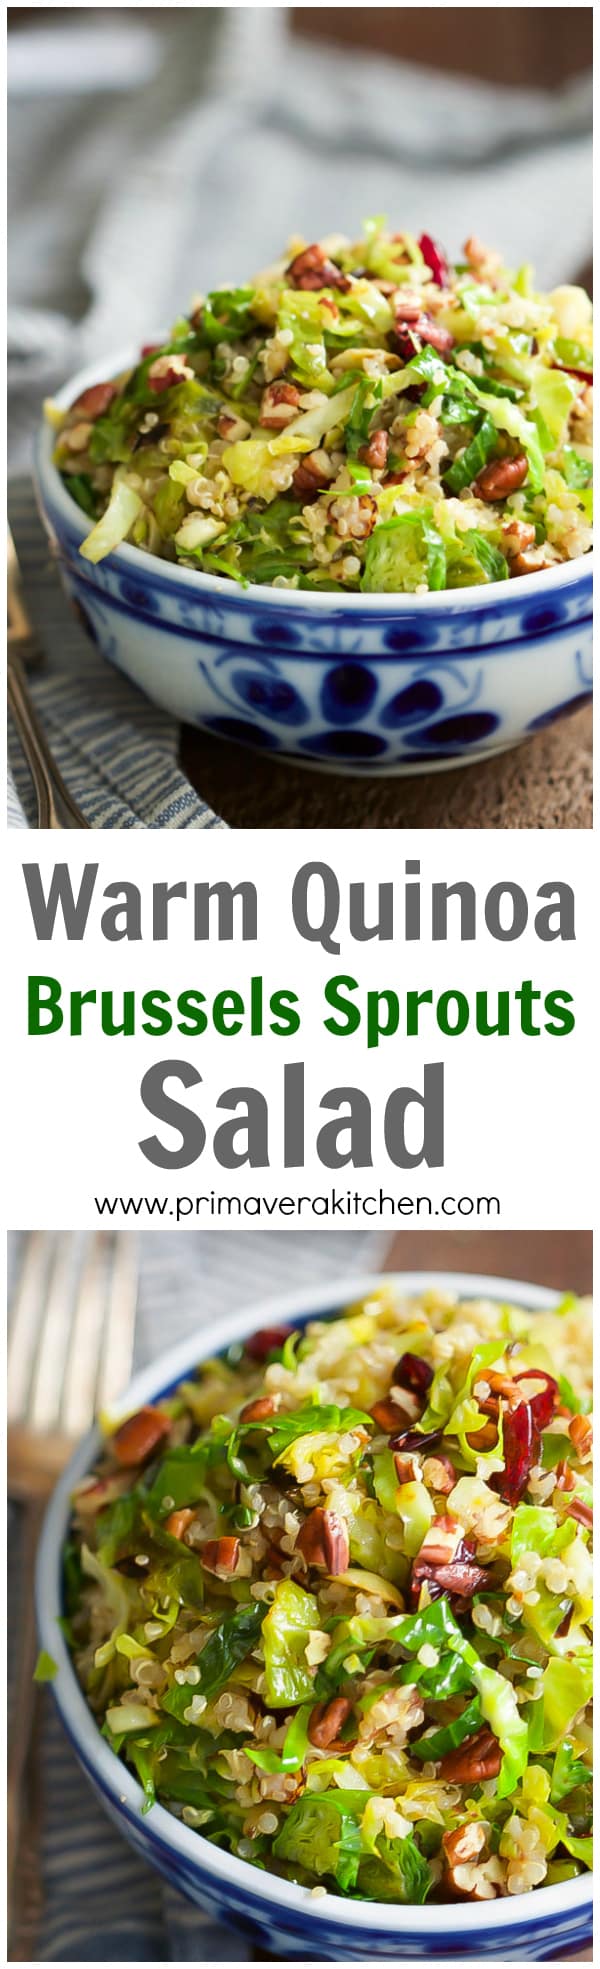 warm-quinoa-brussels-sprouts-salad - This Warm Quinoa Brussels Sprouts Salad is made with sauteé brussels sprouts, dried cranberries, chopped pecans and it's tossed with a delicious orange vinaigrette.